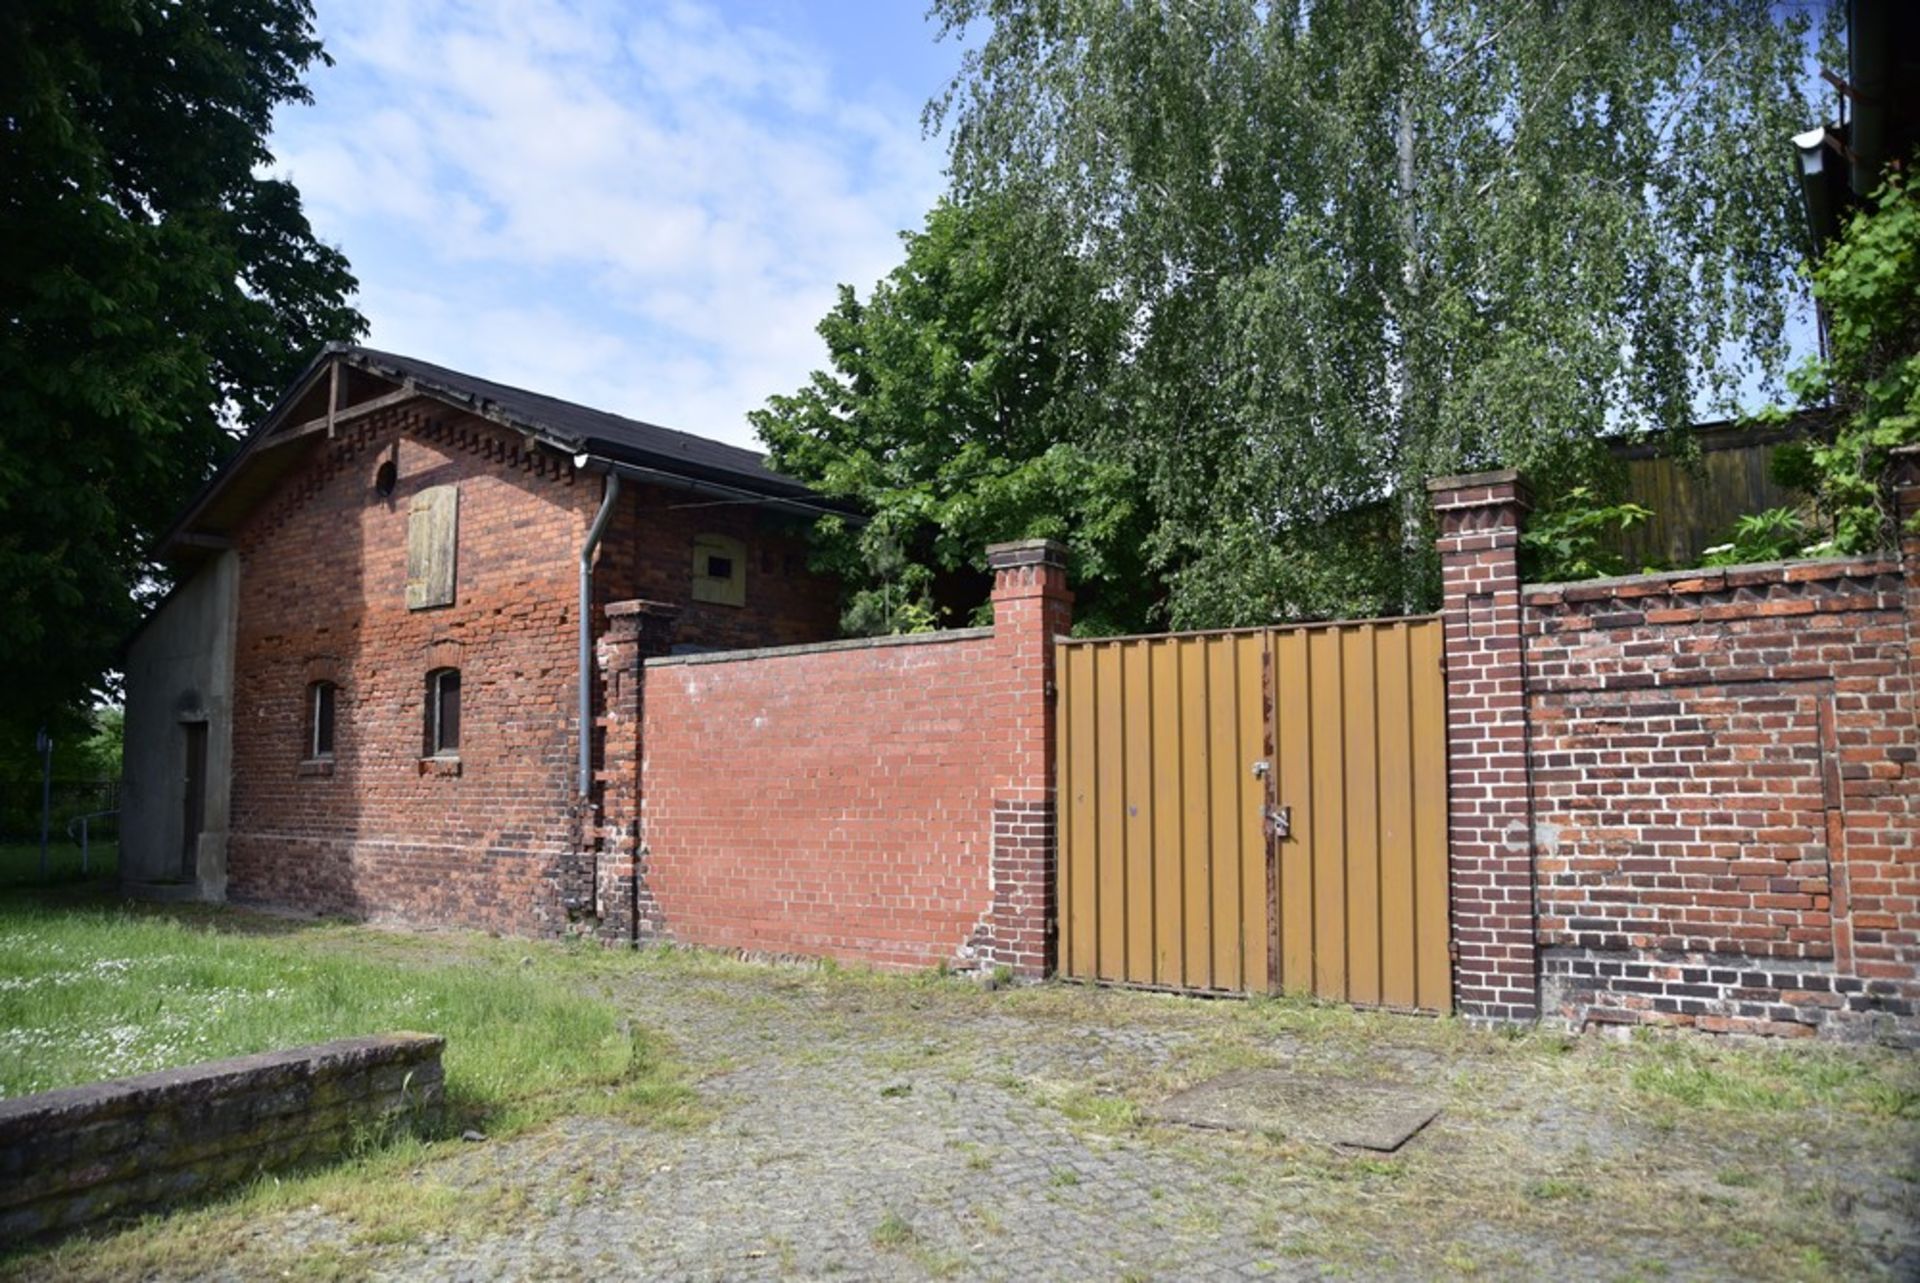 STATION HOUSE, GOODS SHED, OVER ONE ACRE Tangerhütte, Saxony, Germany, - Image 30 of 98